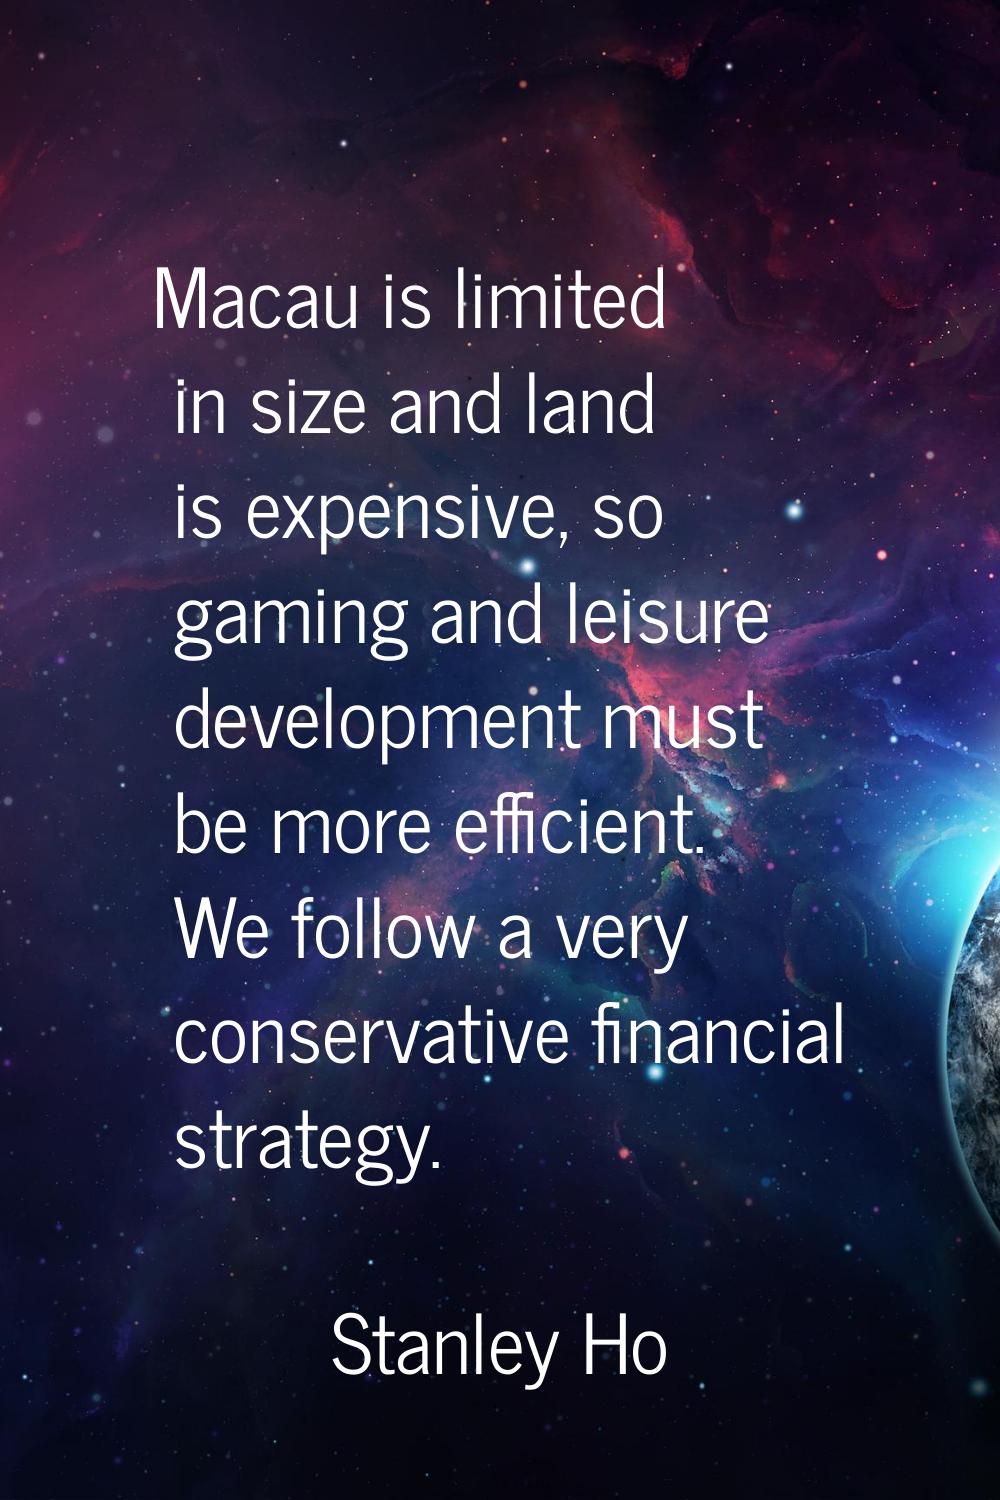 Macau is limited in size and land is expensive, so gaming and leisure development must be more effi